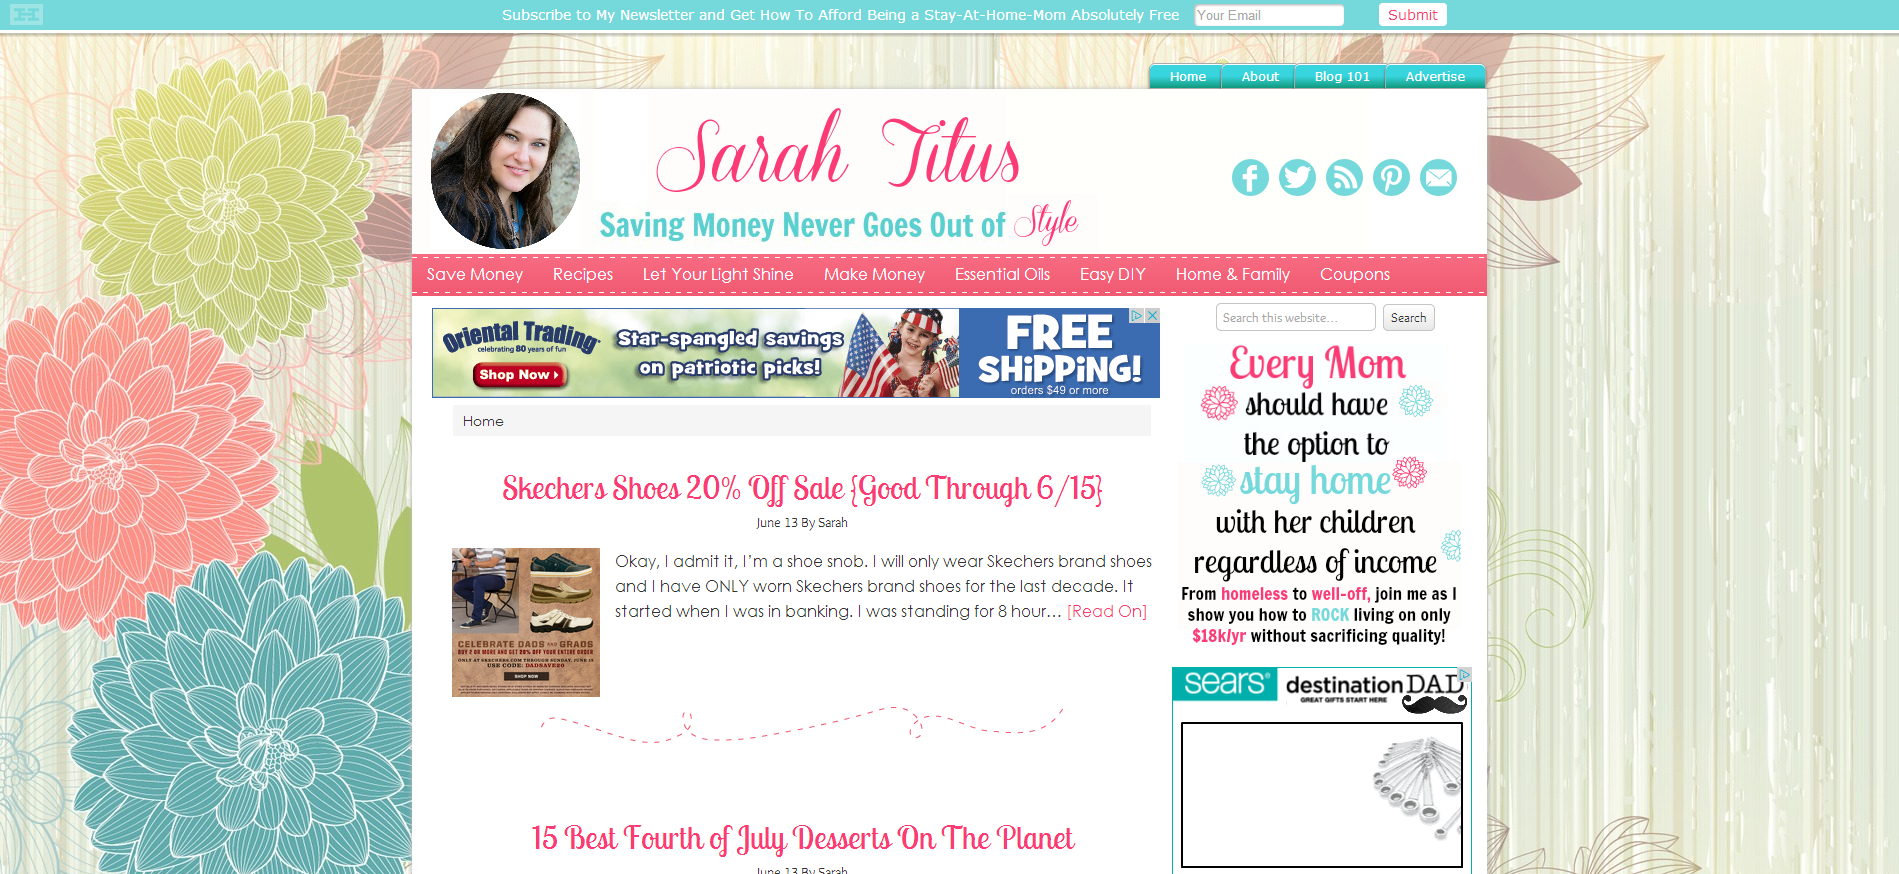 Saving Money Never Goes Out of Style blog screenshot